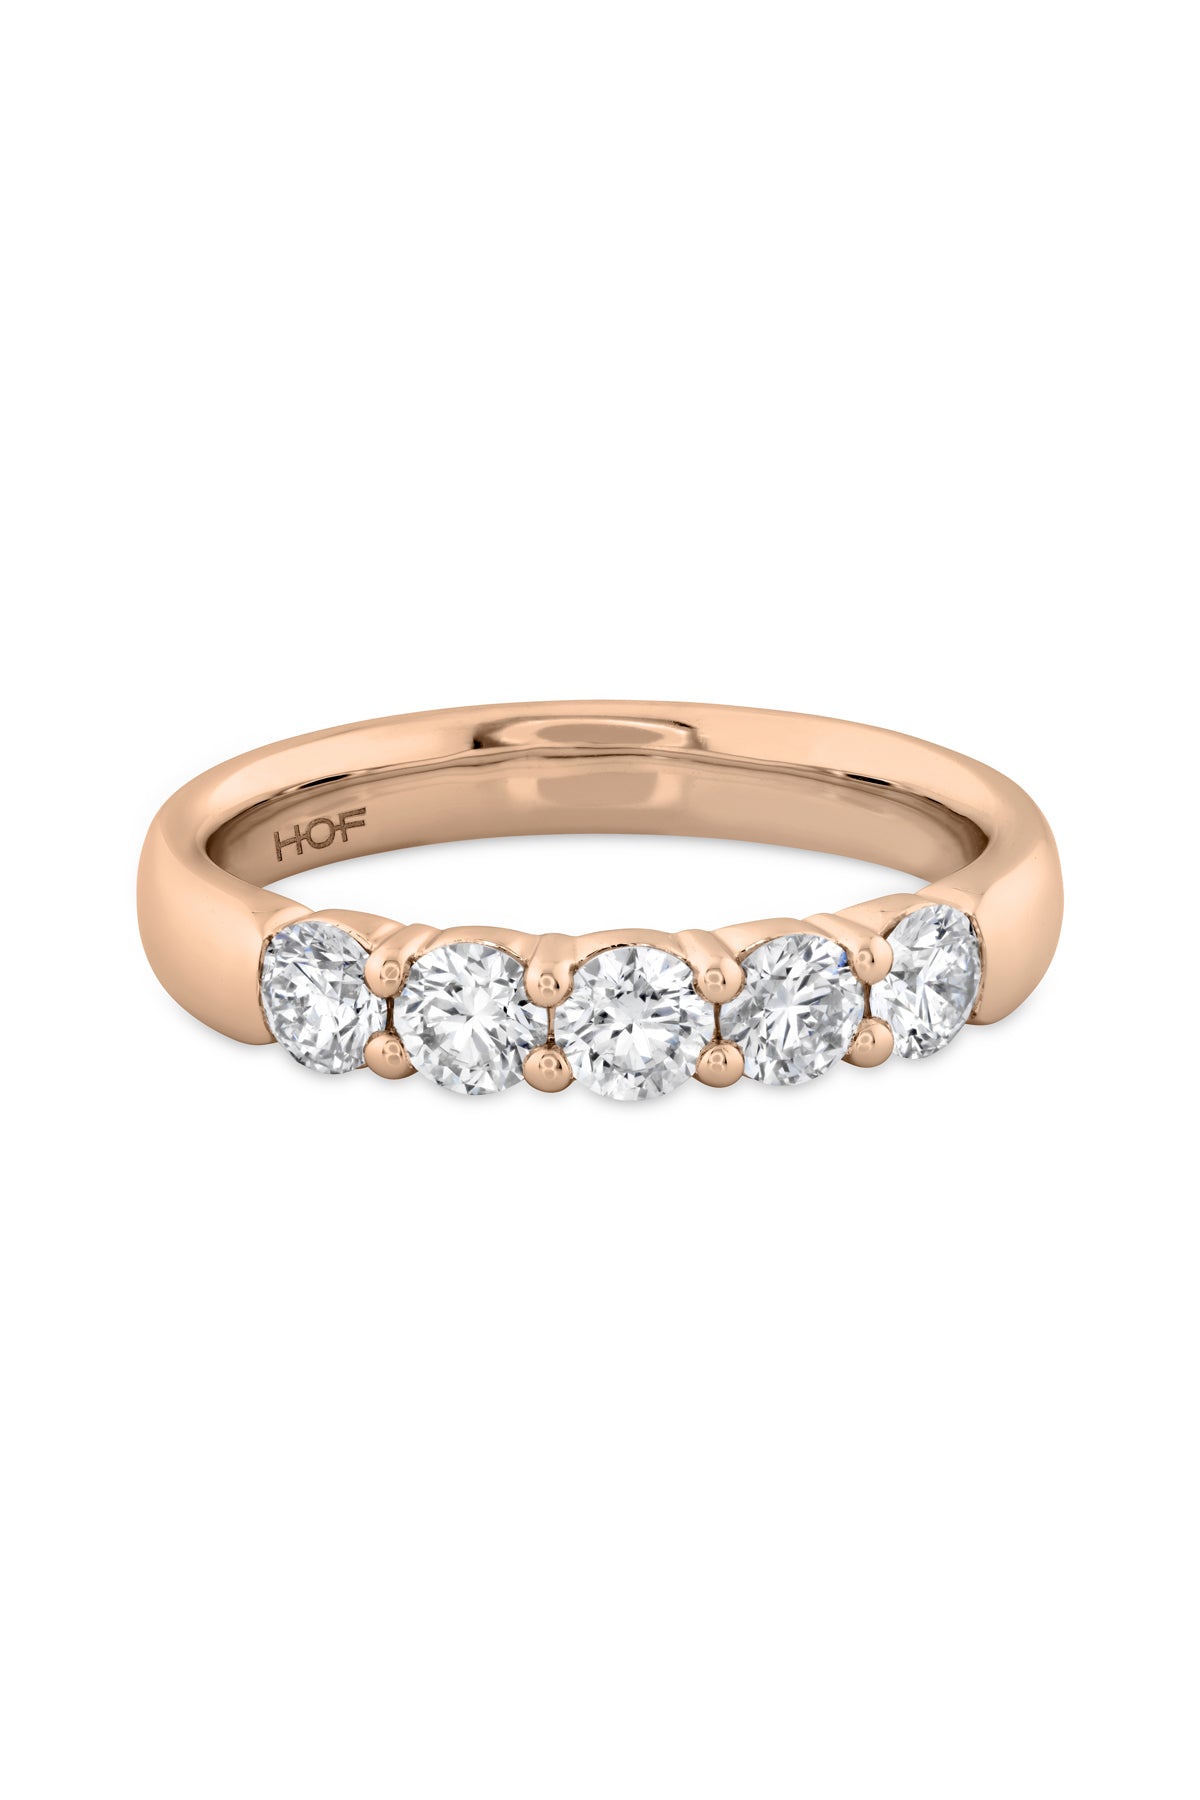 Signature 5 Stone Band From Hearts On Fire available at LeGassick Diamonds and Jewellery Gold Coast, Australia